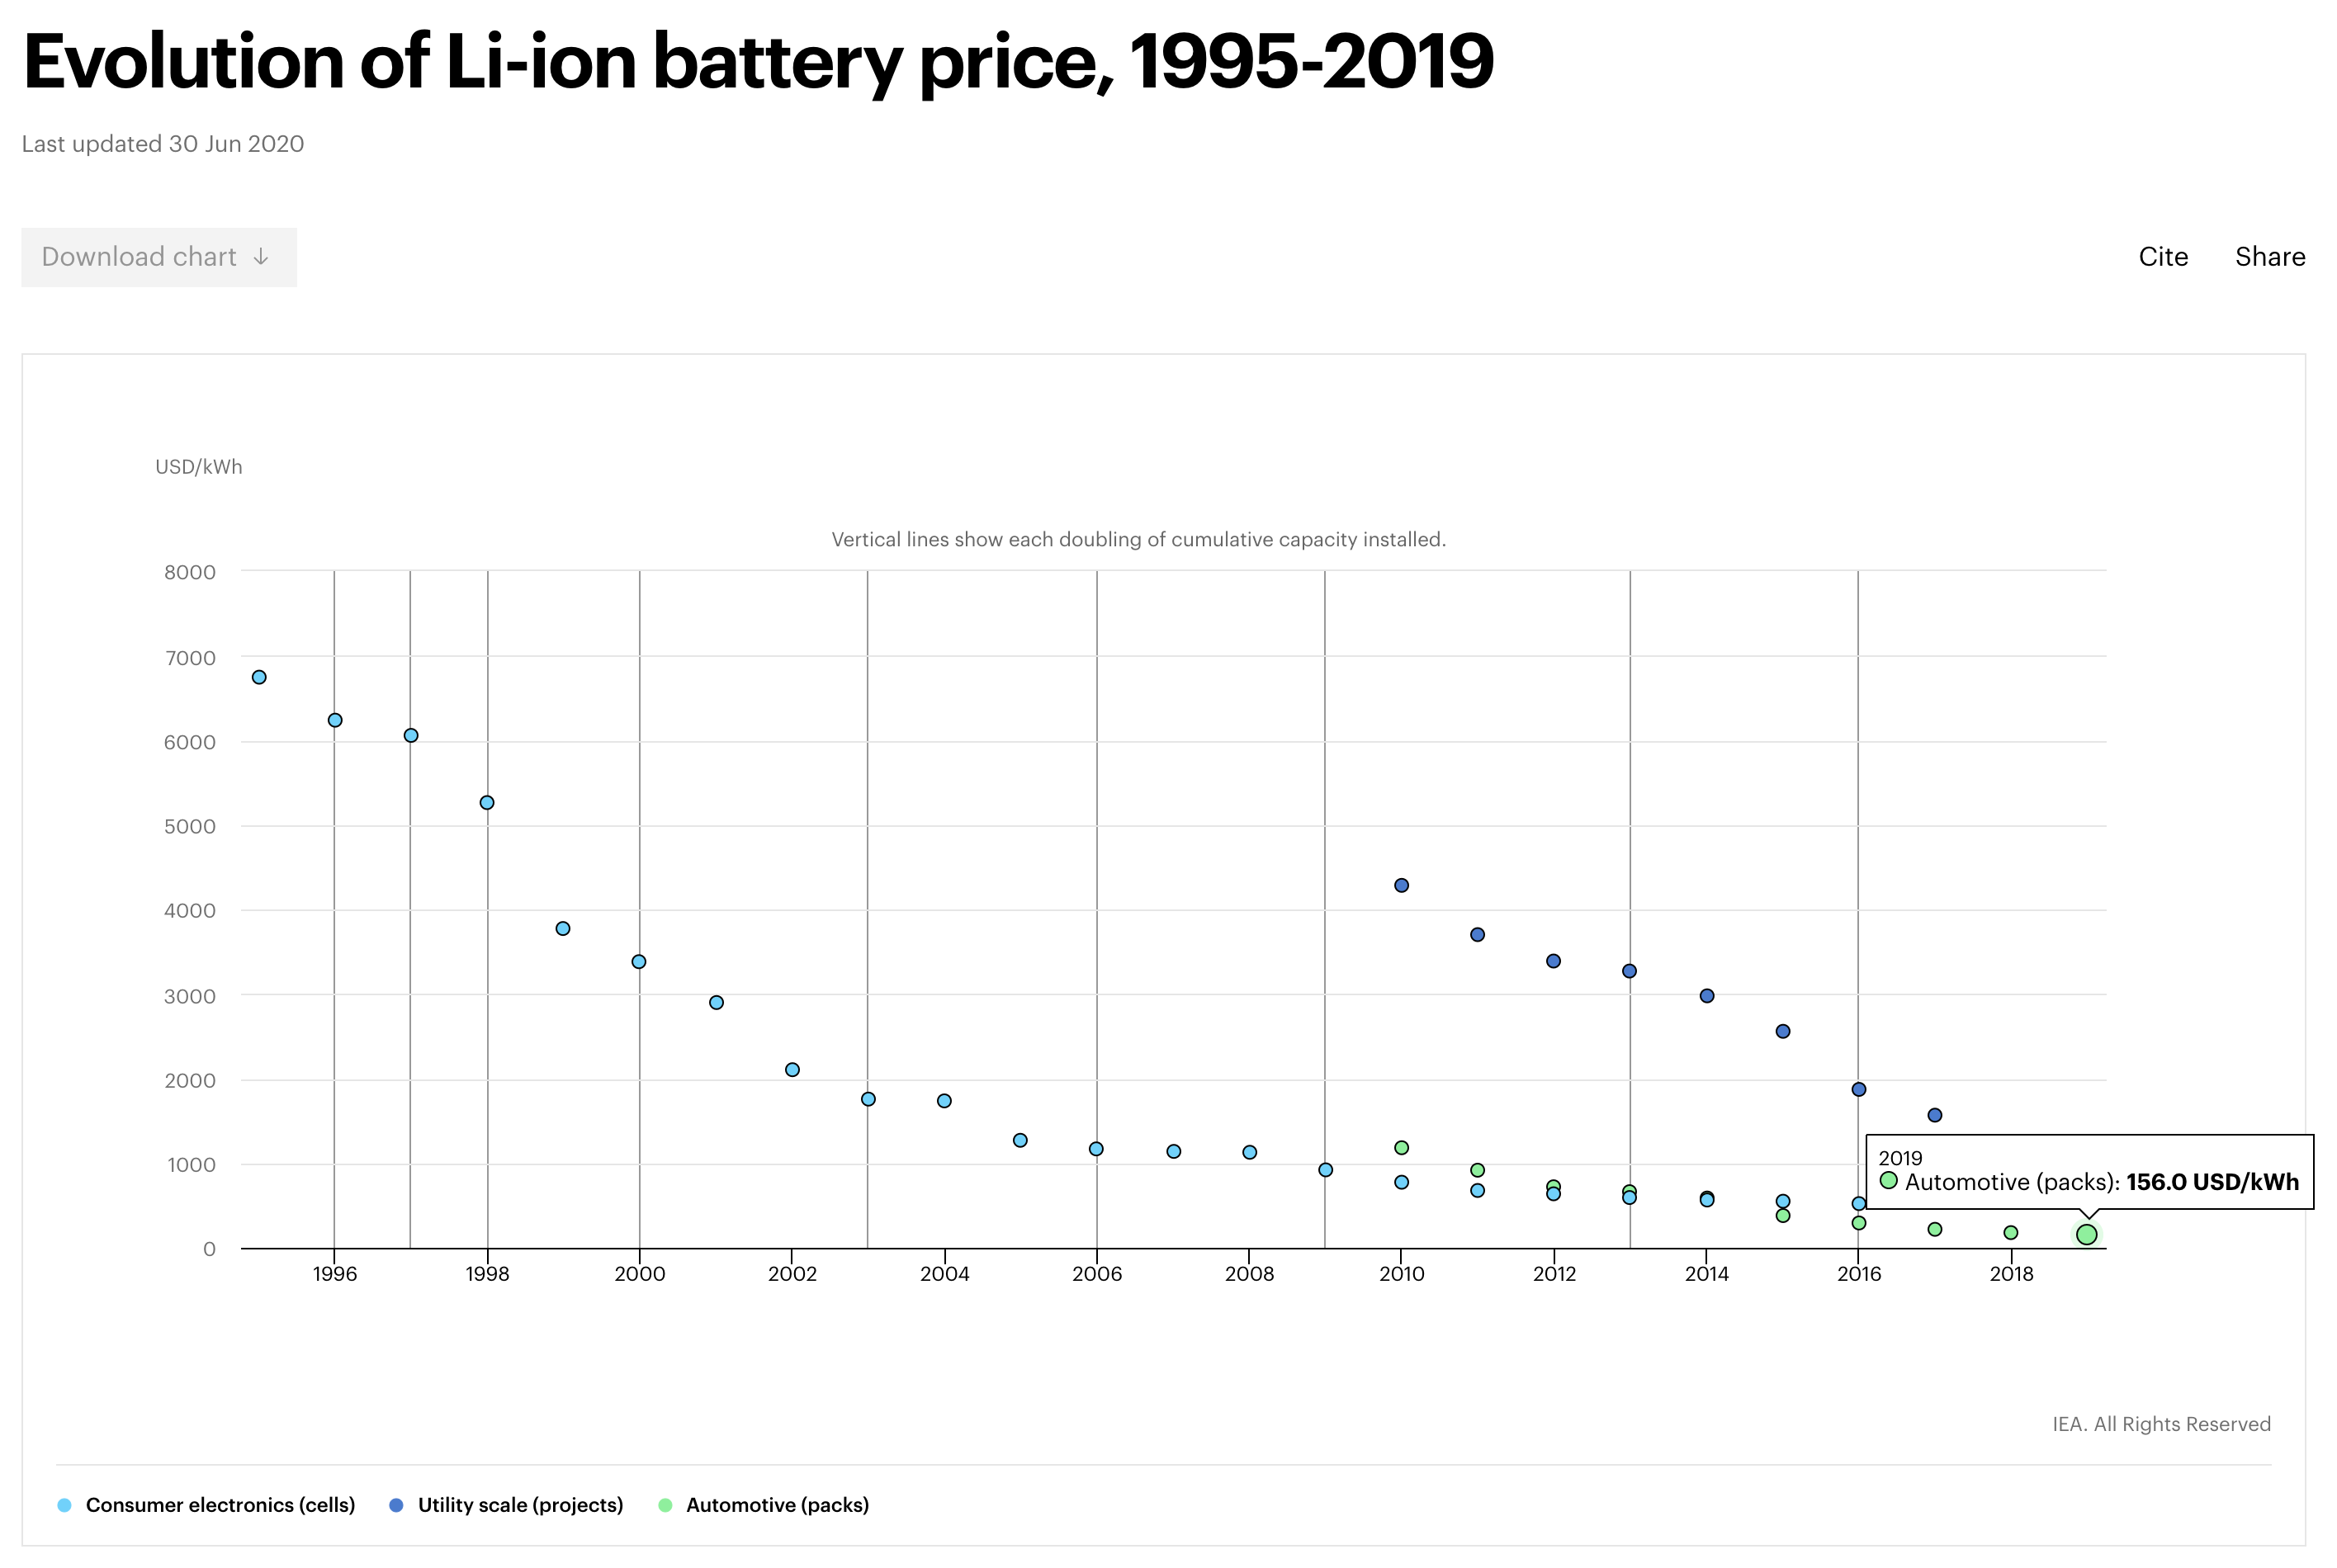 Lithium-ion battery pack costs trend 2019